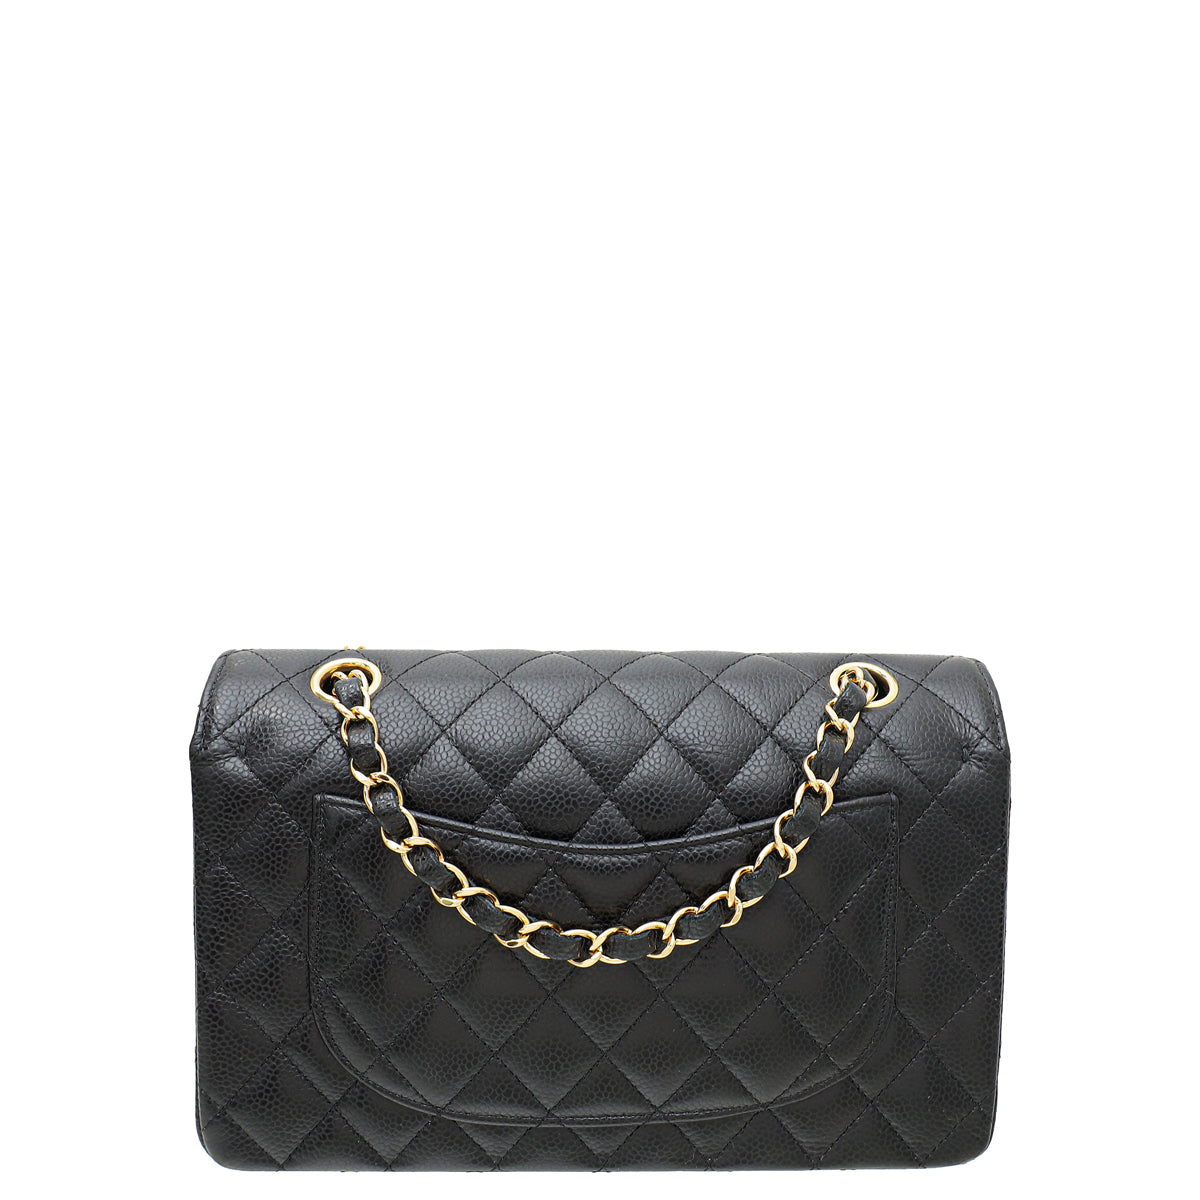 Chanel Black CC Classic Double Flap Small Bag